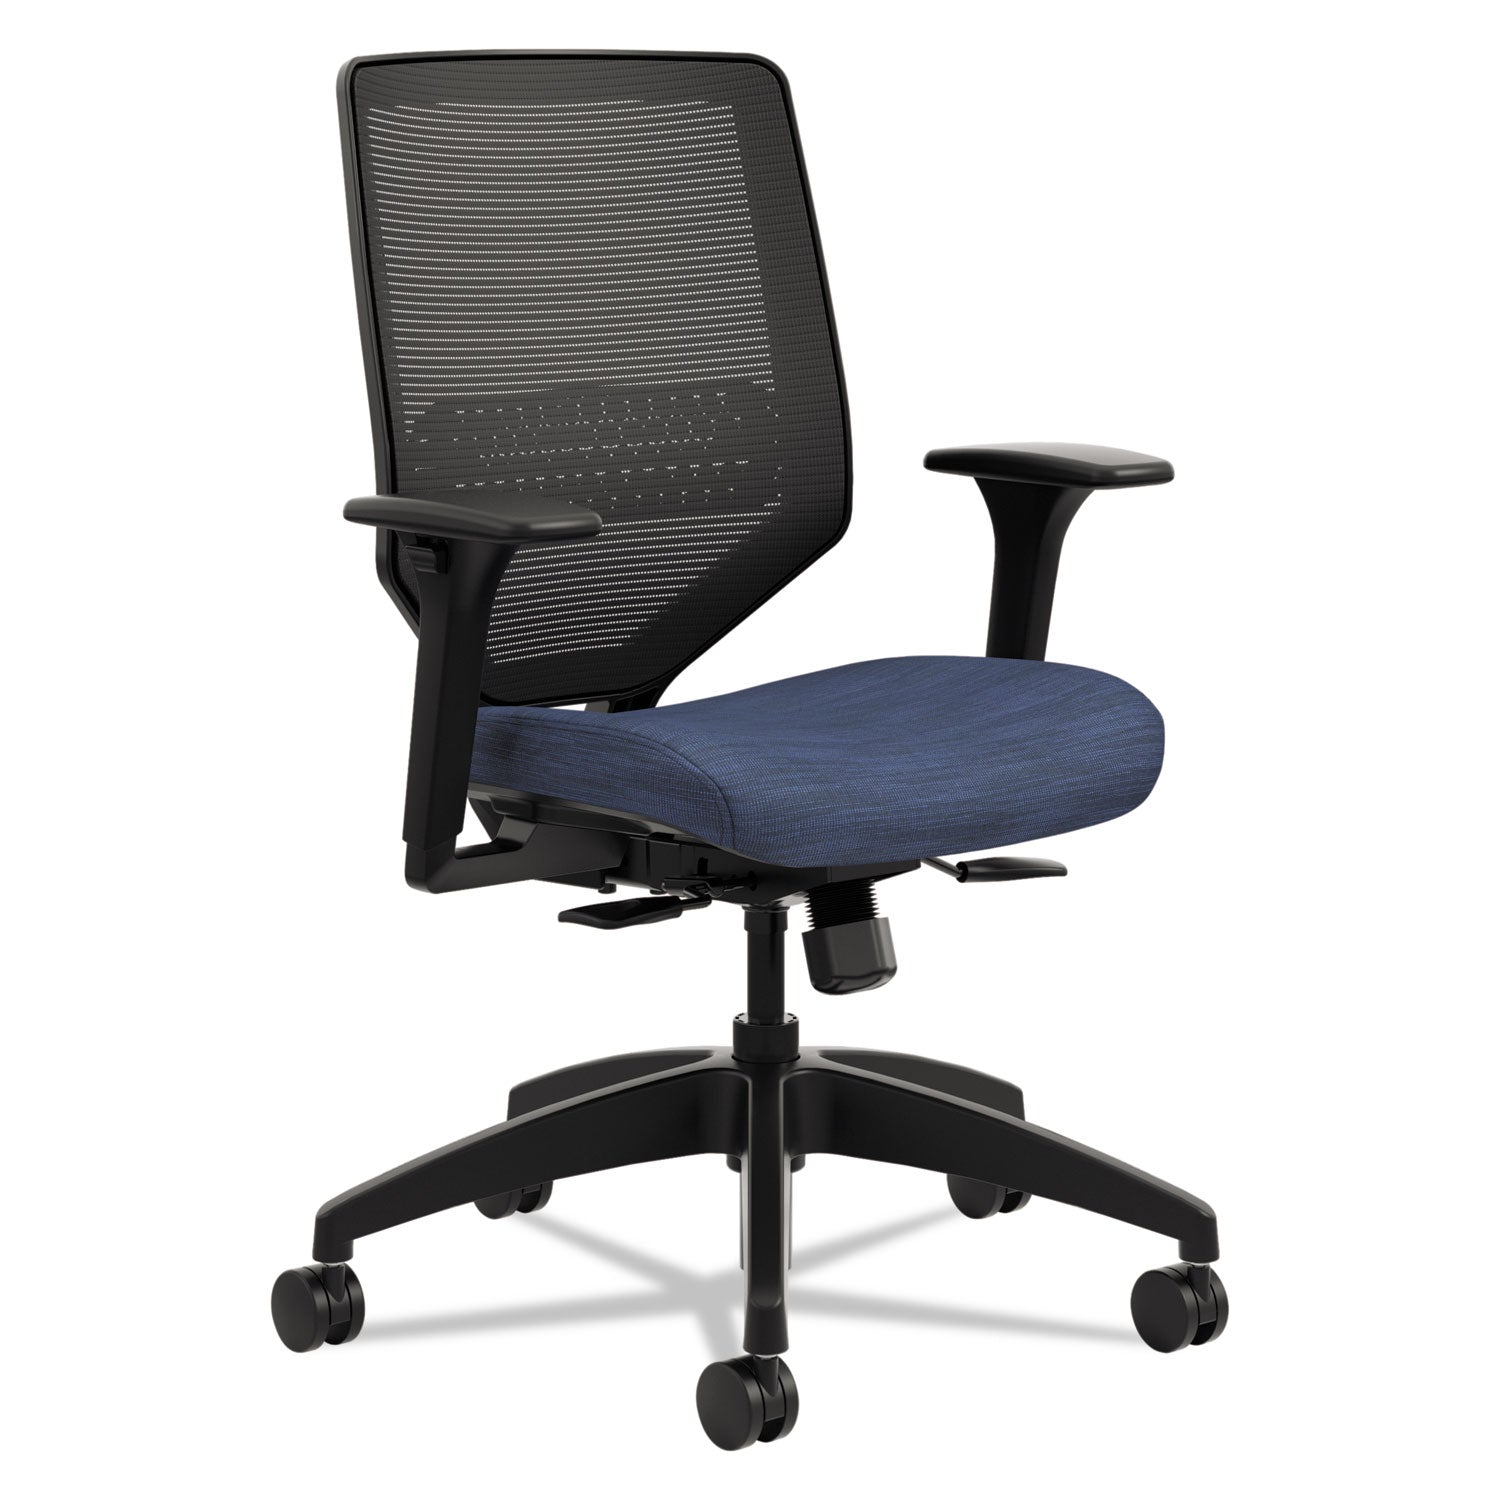 solve-series-mesh-back-task-chair-supports-up-to-300-lb-16-to-22-seat-height-midnight-seat-black-back-base_honsvm1alc90tk - 1